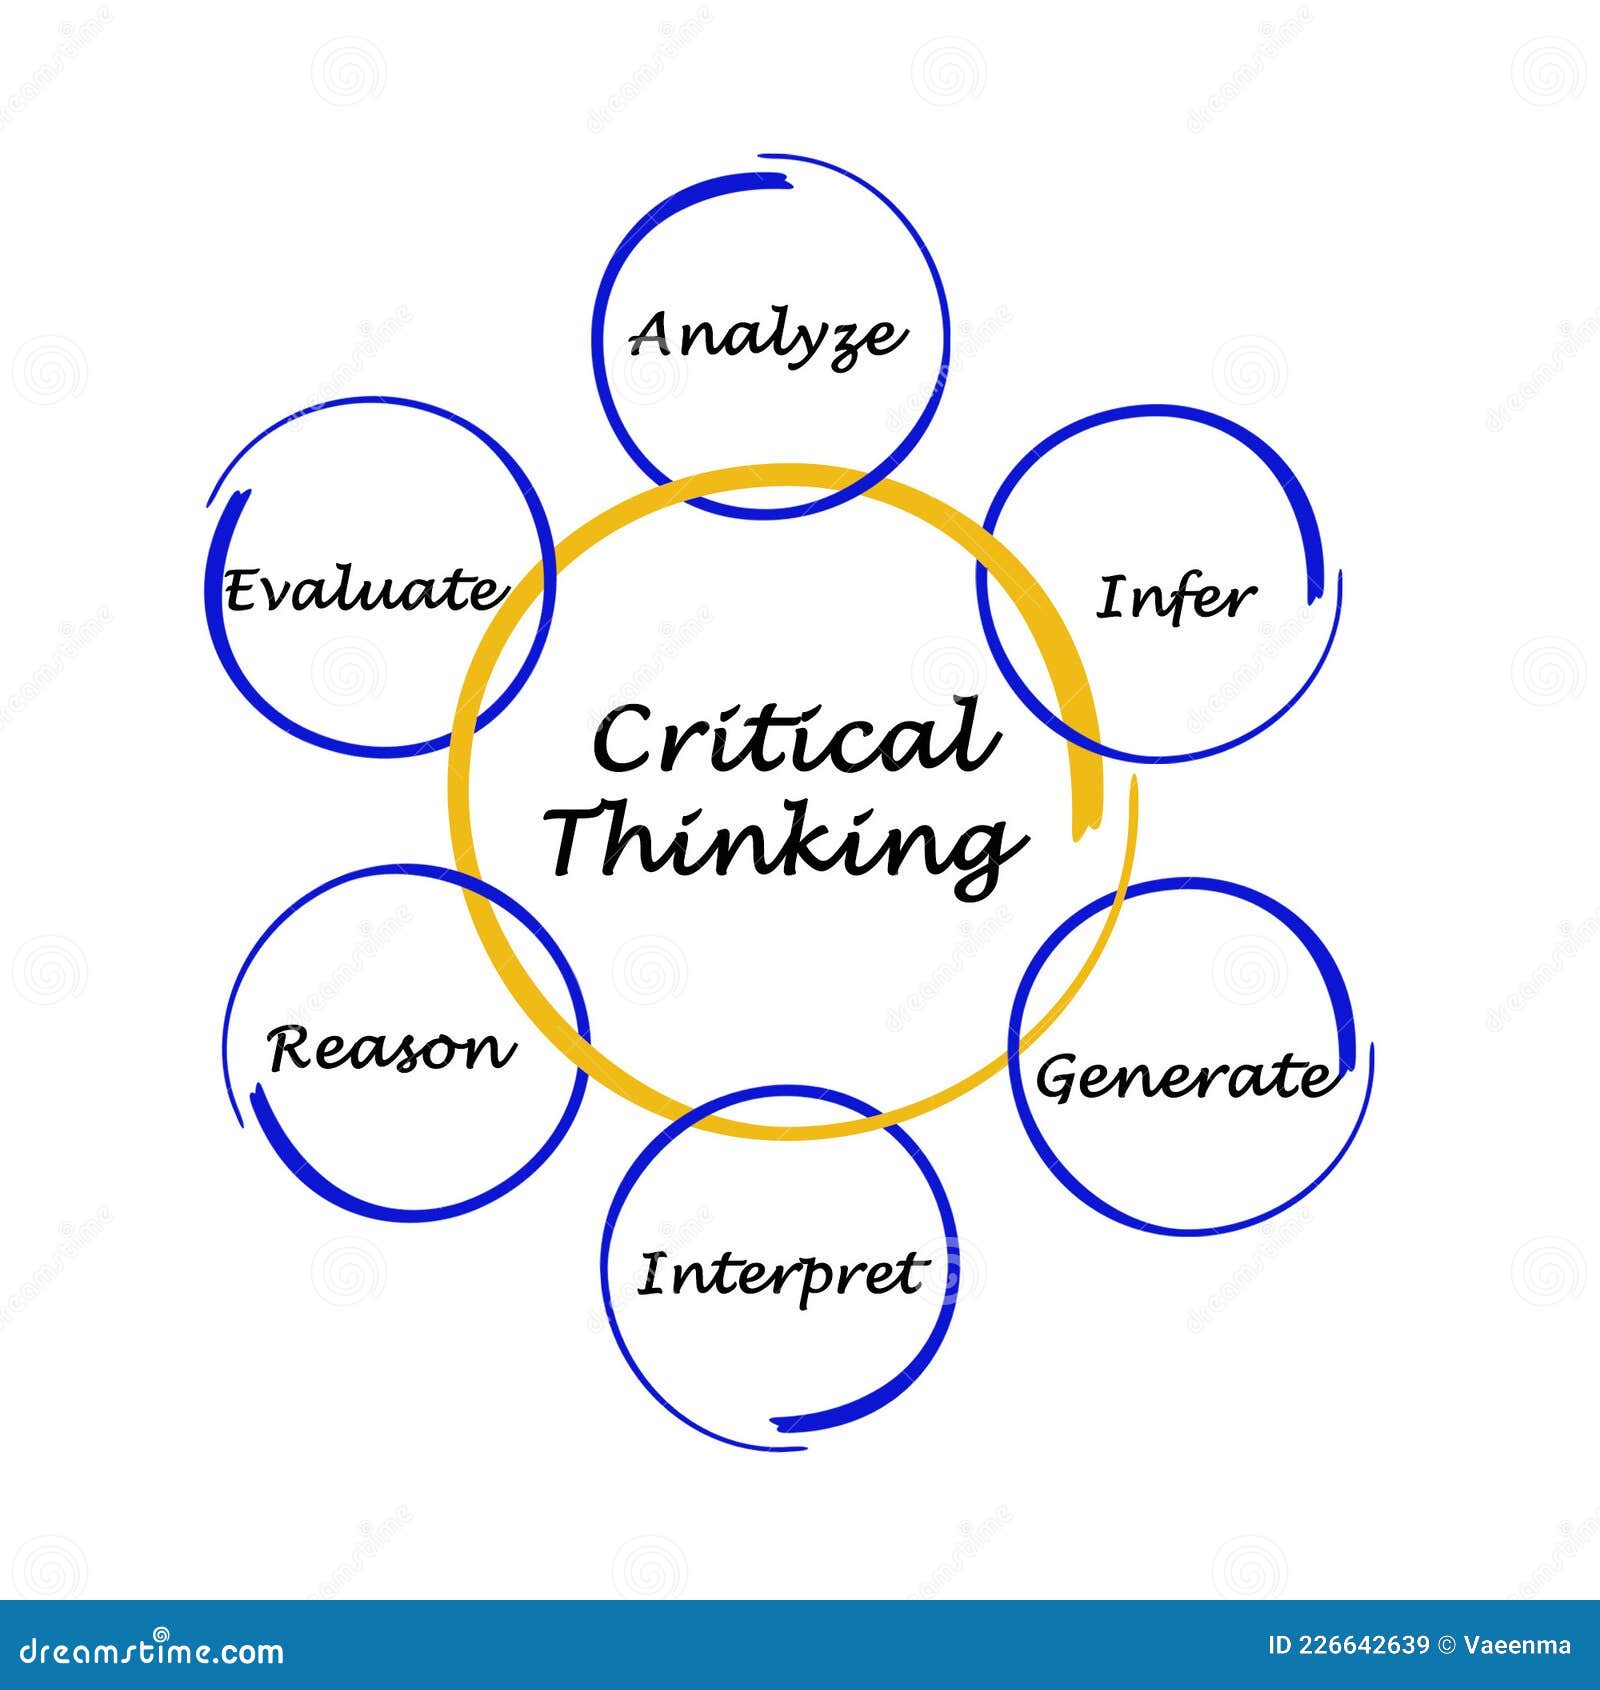 what are the three areas to generate critical thinking